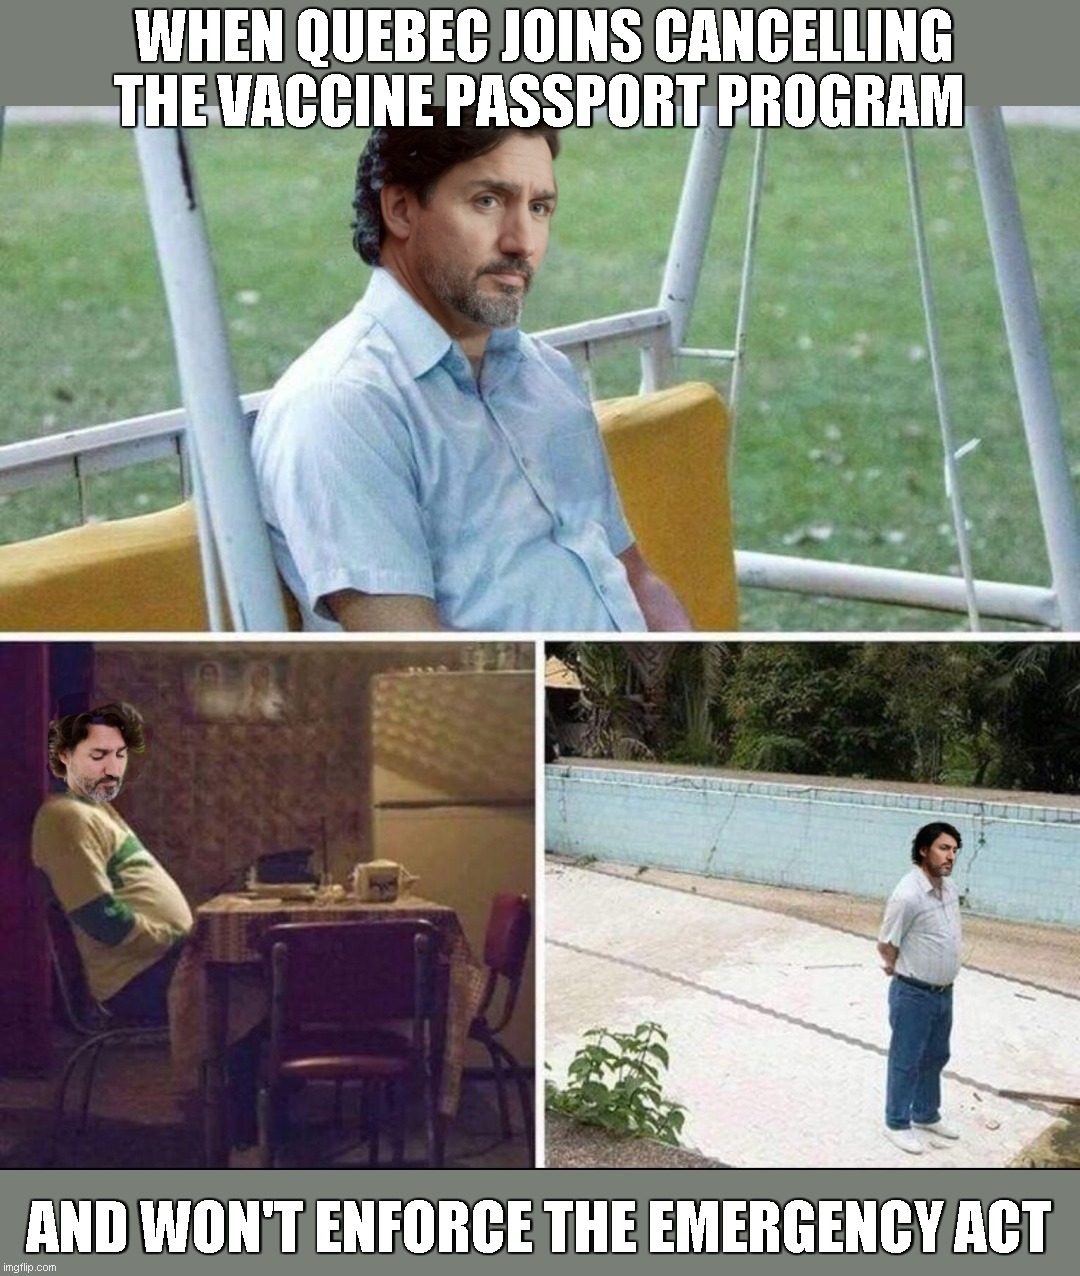 WHEN QUEBEC JOINS CANCELLING THE VACCINE PASSPORT PROGRAM AND WON'T ENFORCE THE EMERGENCY ACT | made w/ Imgflip meme maker